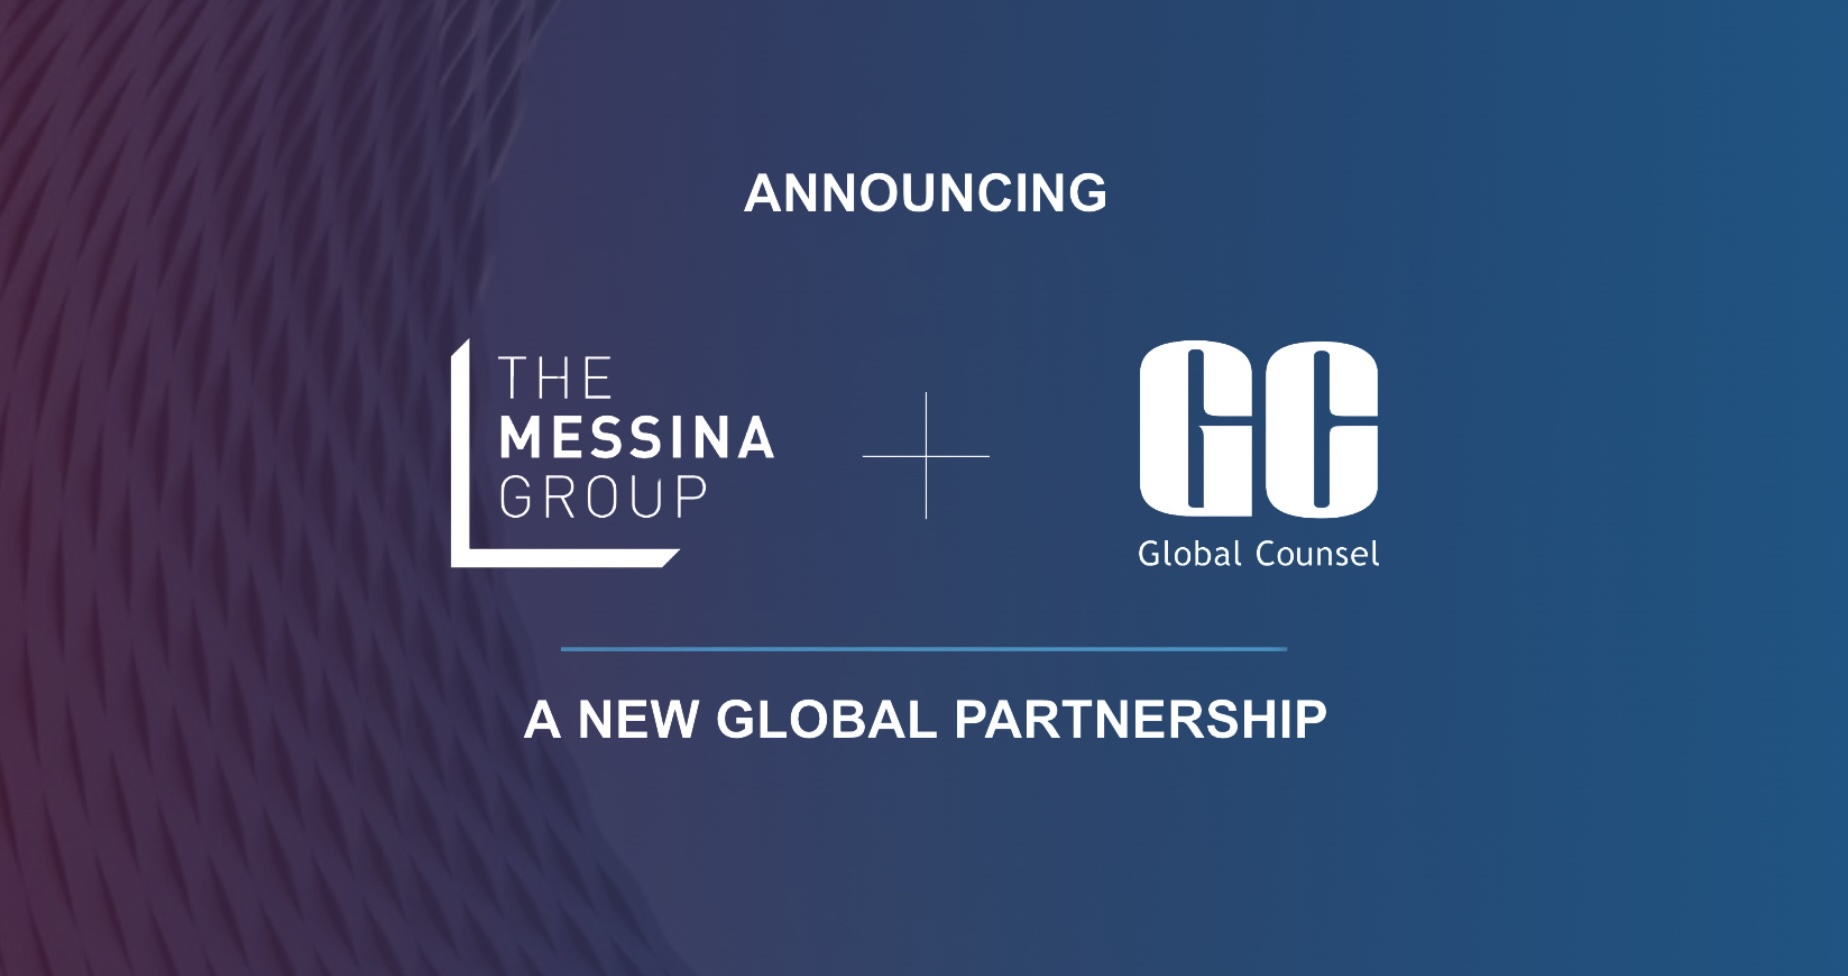 Graphic of The Messina Group logo and Global Counsel logo - Announcing a New Global Partnership